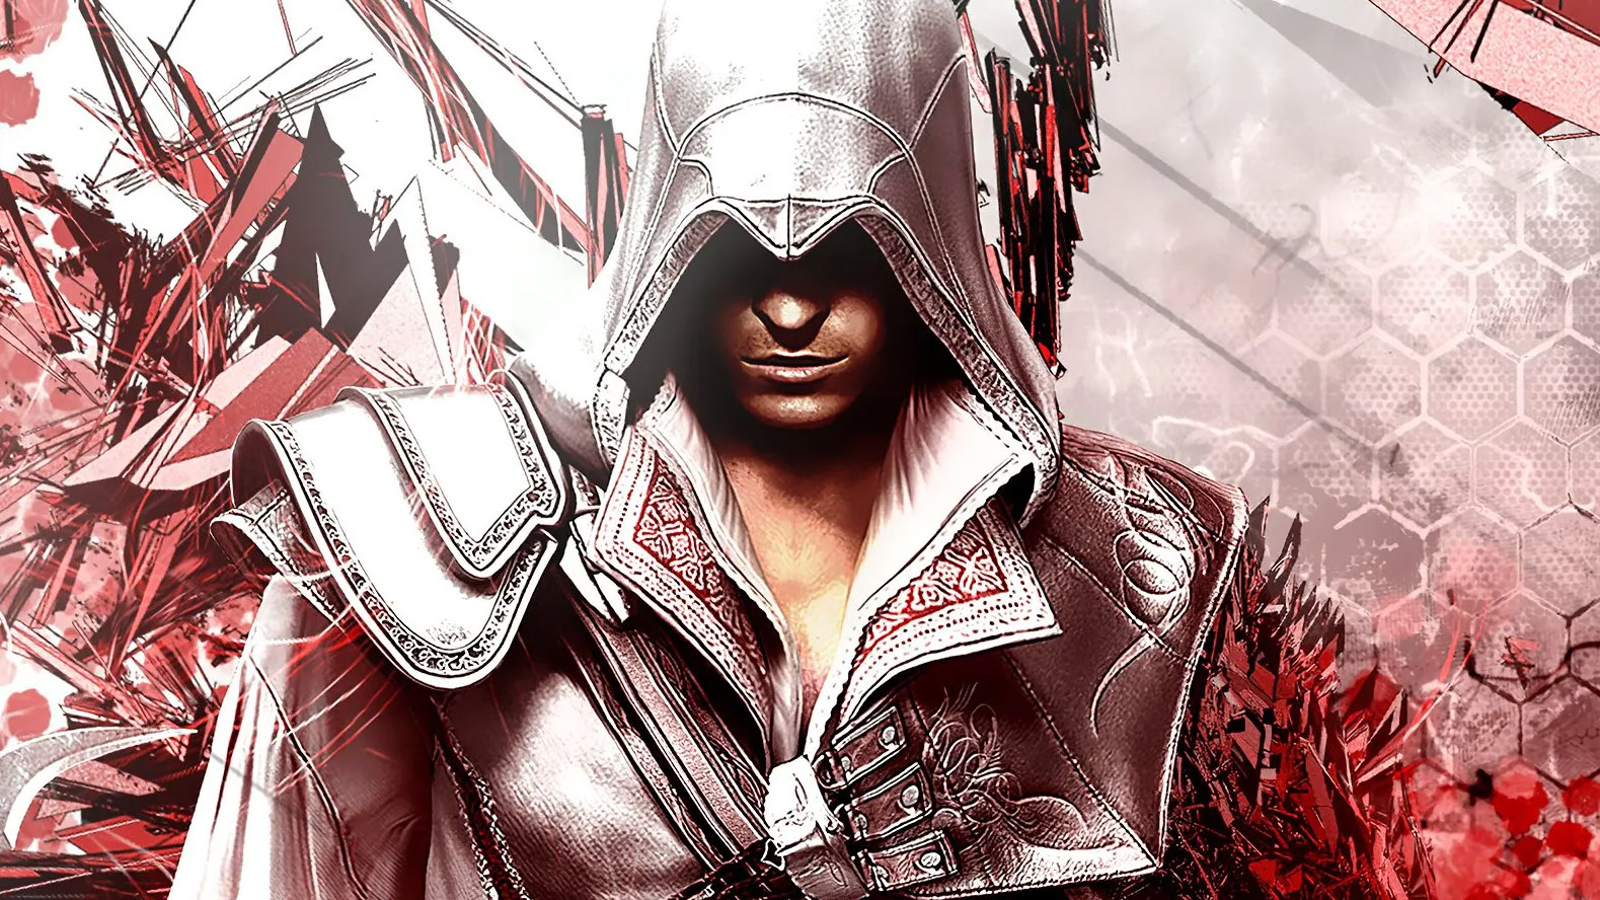 Assassin's Creed Ezio Collection on Nintendo Switch isn't a bad port - but  it could have been better